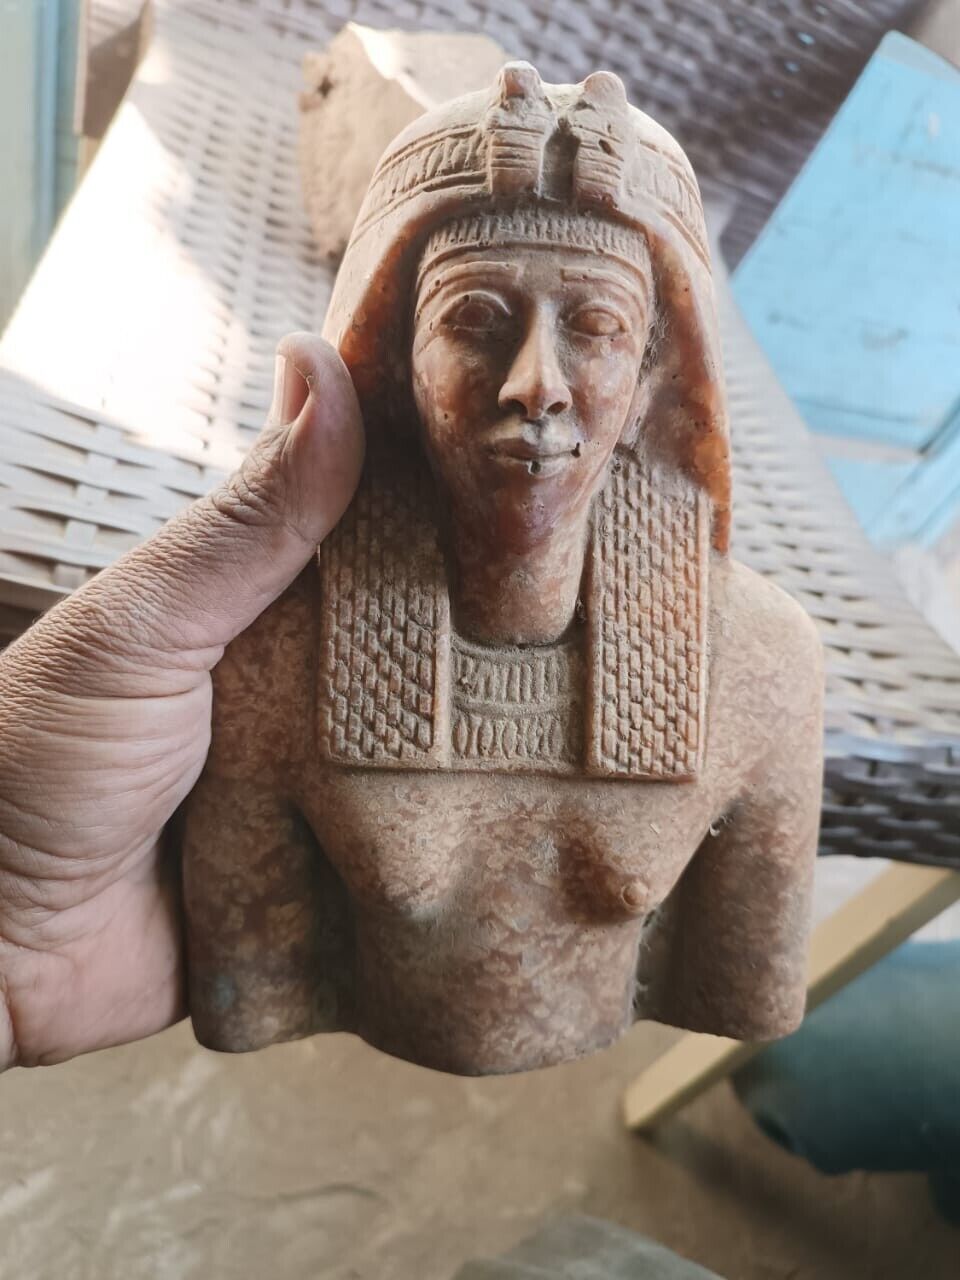 Rare Antique Egyptian Statue of King Thutmose III | Ancient Pharaonic Art